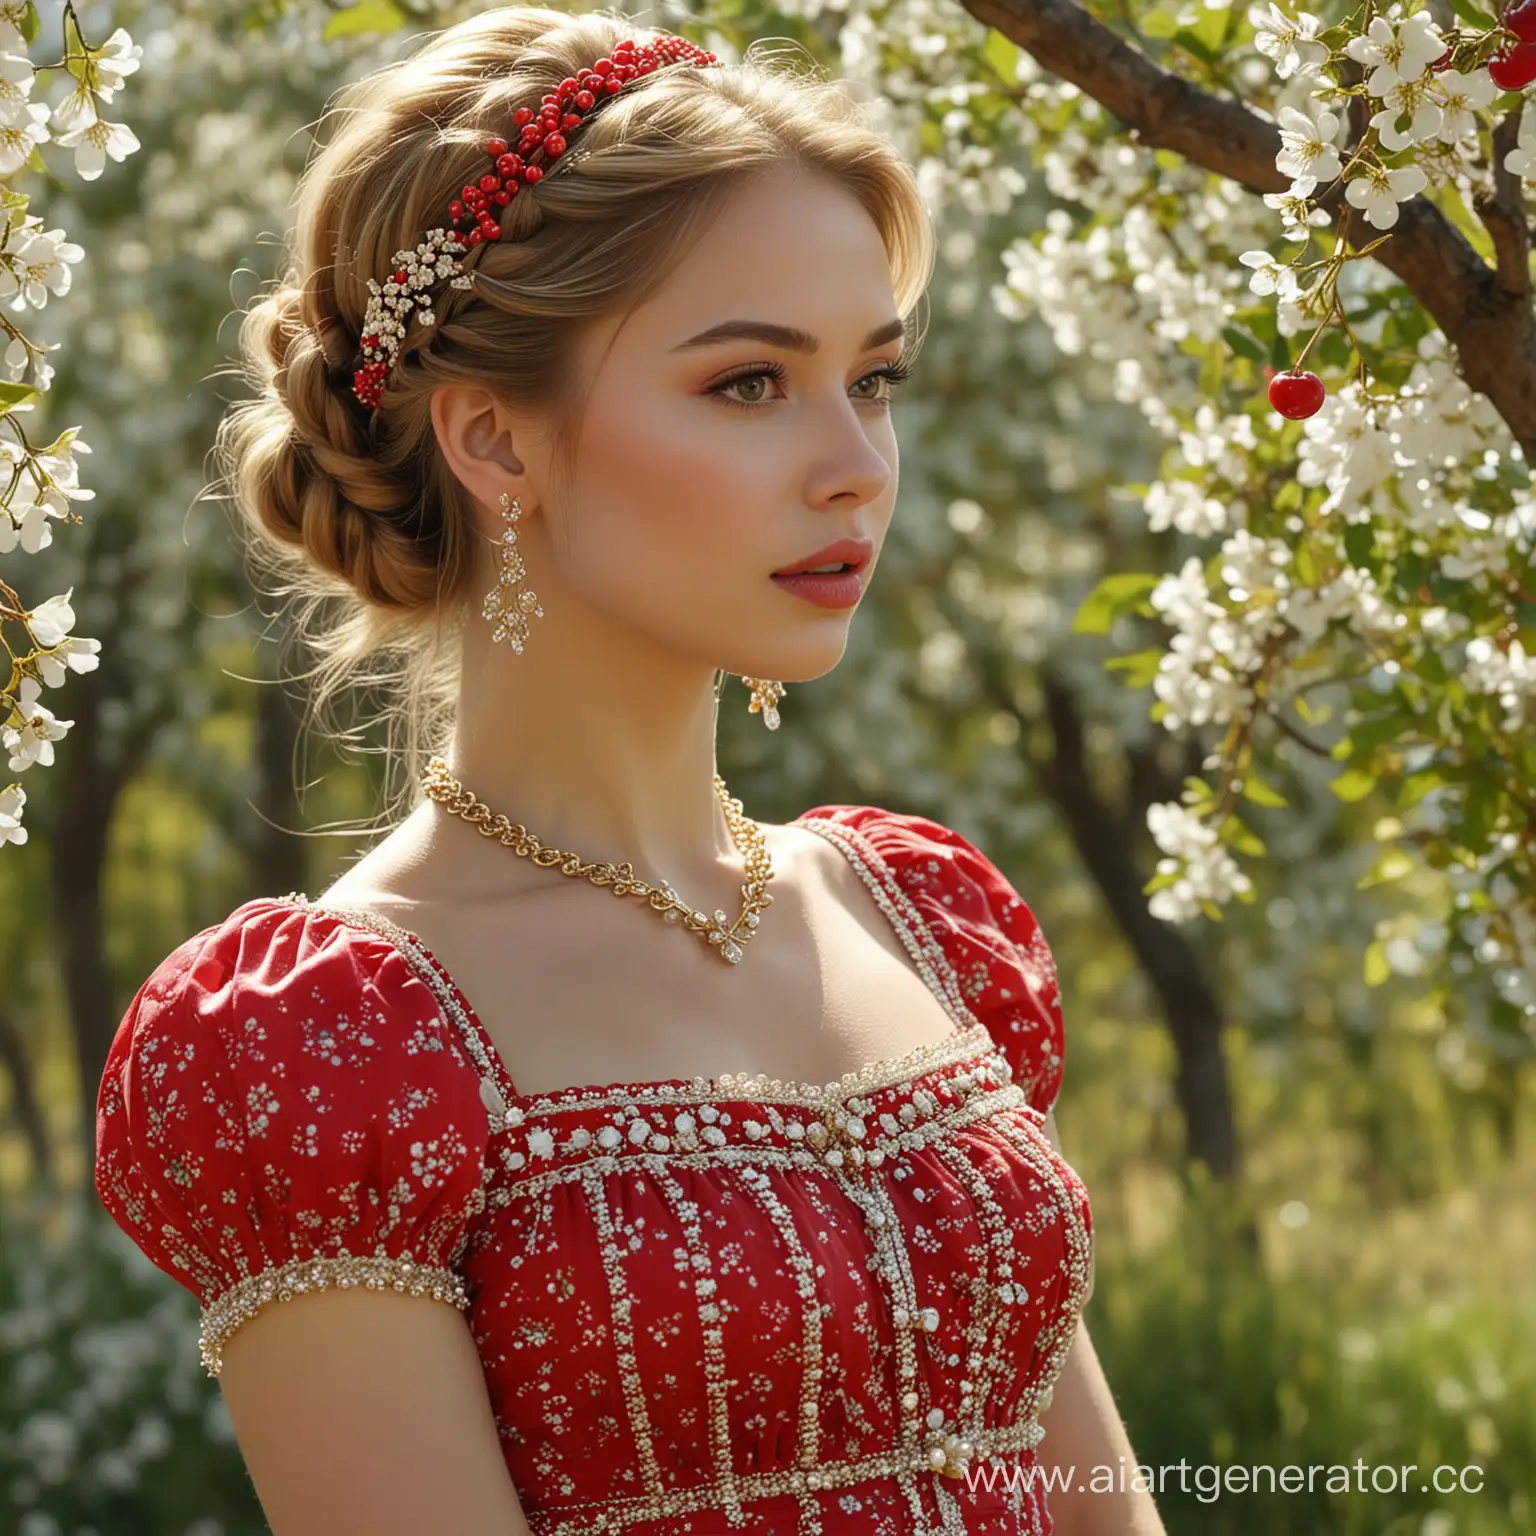 Russian-Cutie-in-Floral-Sundress-with-Kokoshnik-and-Jewelry-in-Cherry-Orchard-Scene